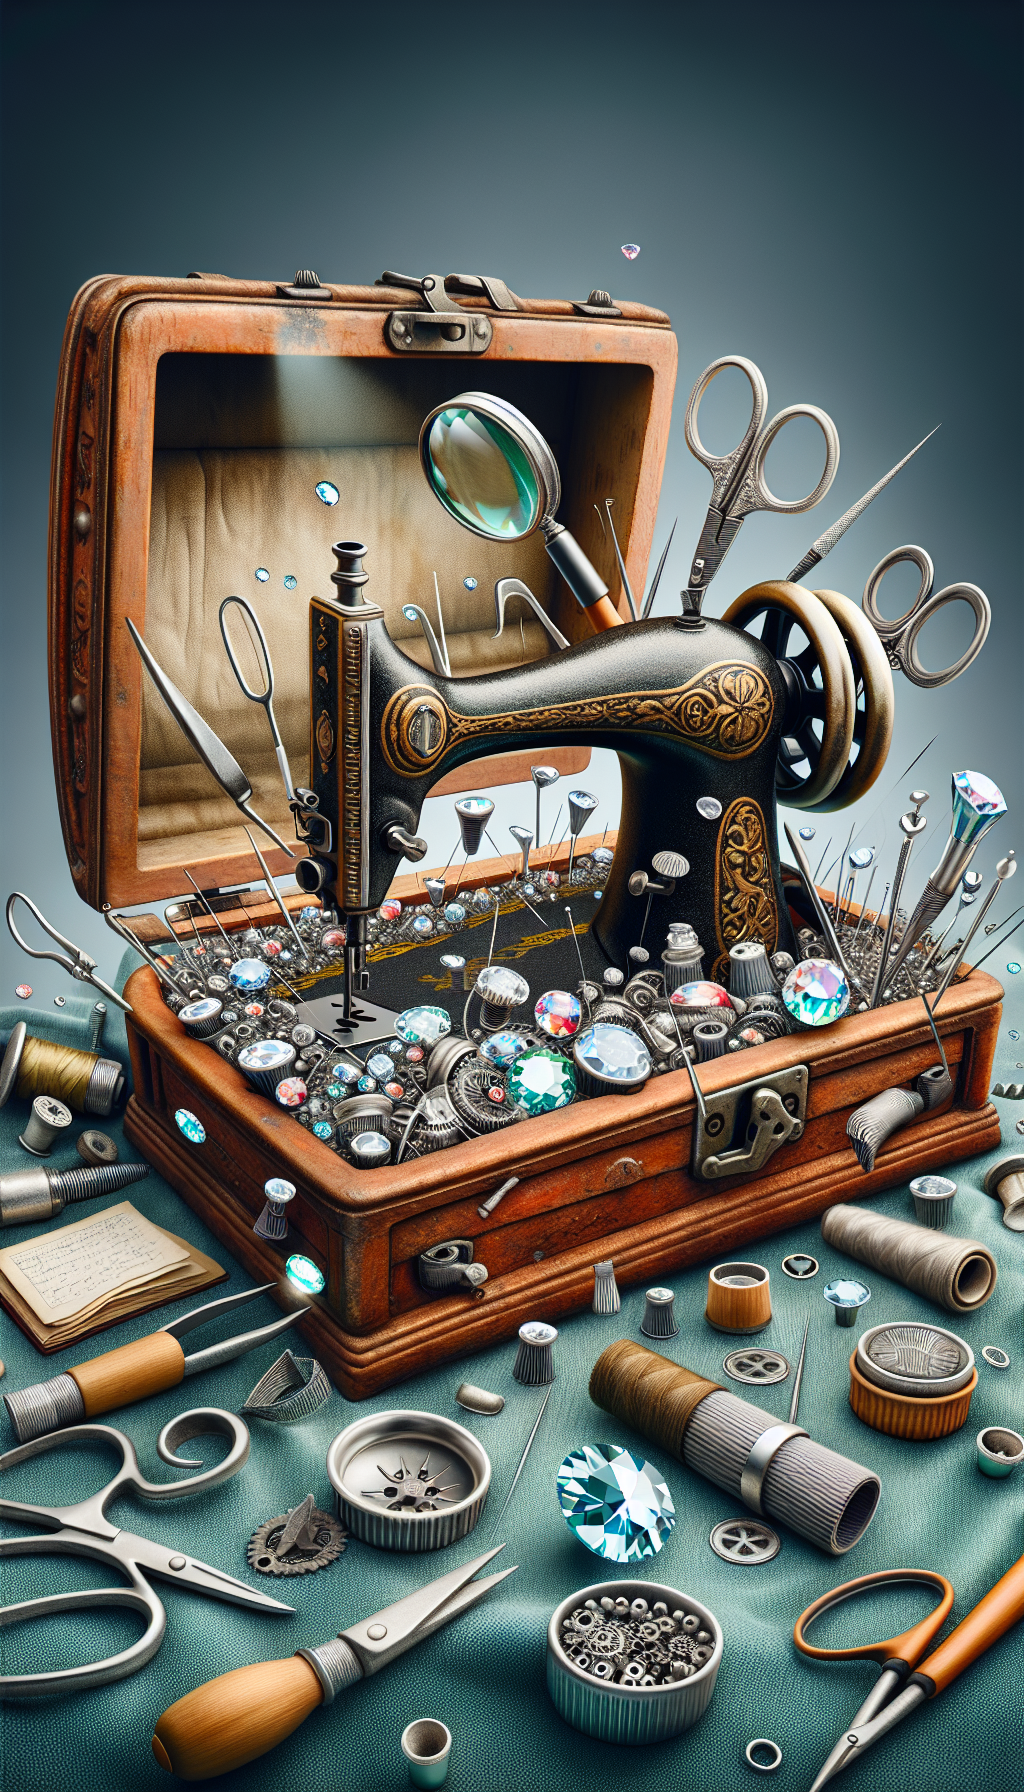 An illustration of an aged, intricately designed sewing machine sits atop an open jewel box, reflecting the idea of value. Sewing accessories carefully examine the machine like mini experts, with a magnifying glass and a tiny checklist, symbolizing evaluation. The styles vary from realistic details on the machine to cartoonish evaluators, creating a vibrant contrast within the image.